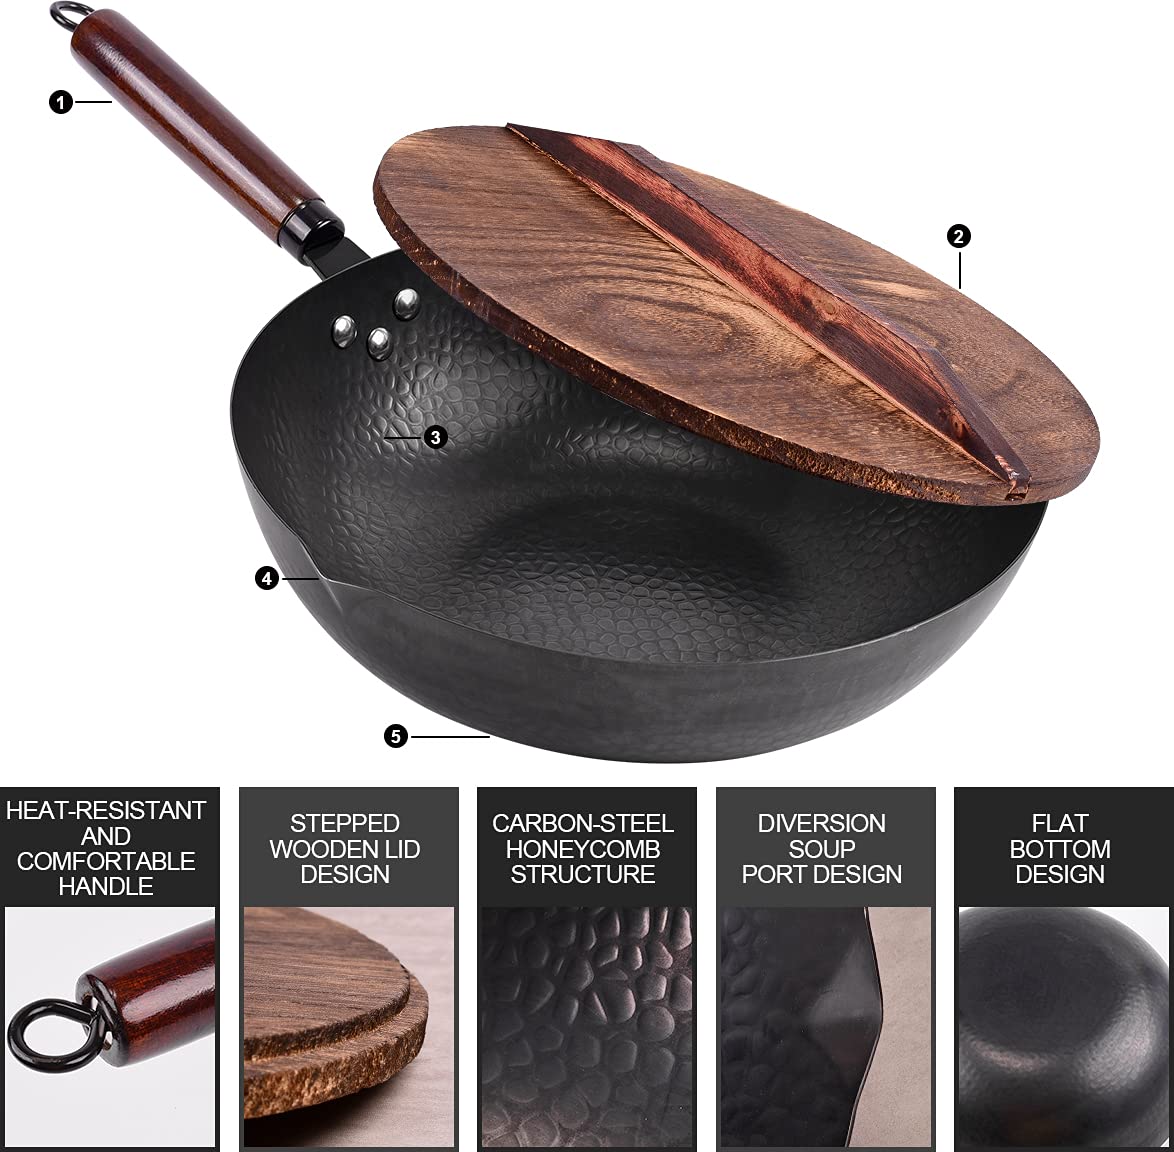 12.8" Carbon Steel Wok-11Pcs Woks & Stir Fry Pans Wok Pan with Lid, No Chemical Coated Chinese Wok with 10 Cookware Accessories, Flat Bottom Wok for Electric, Induction,Gas Stoves